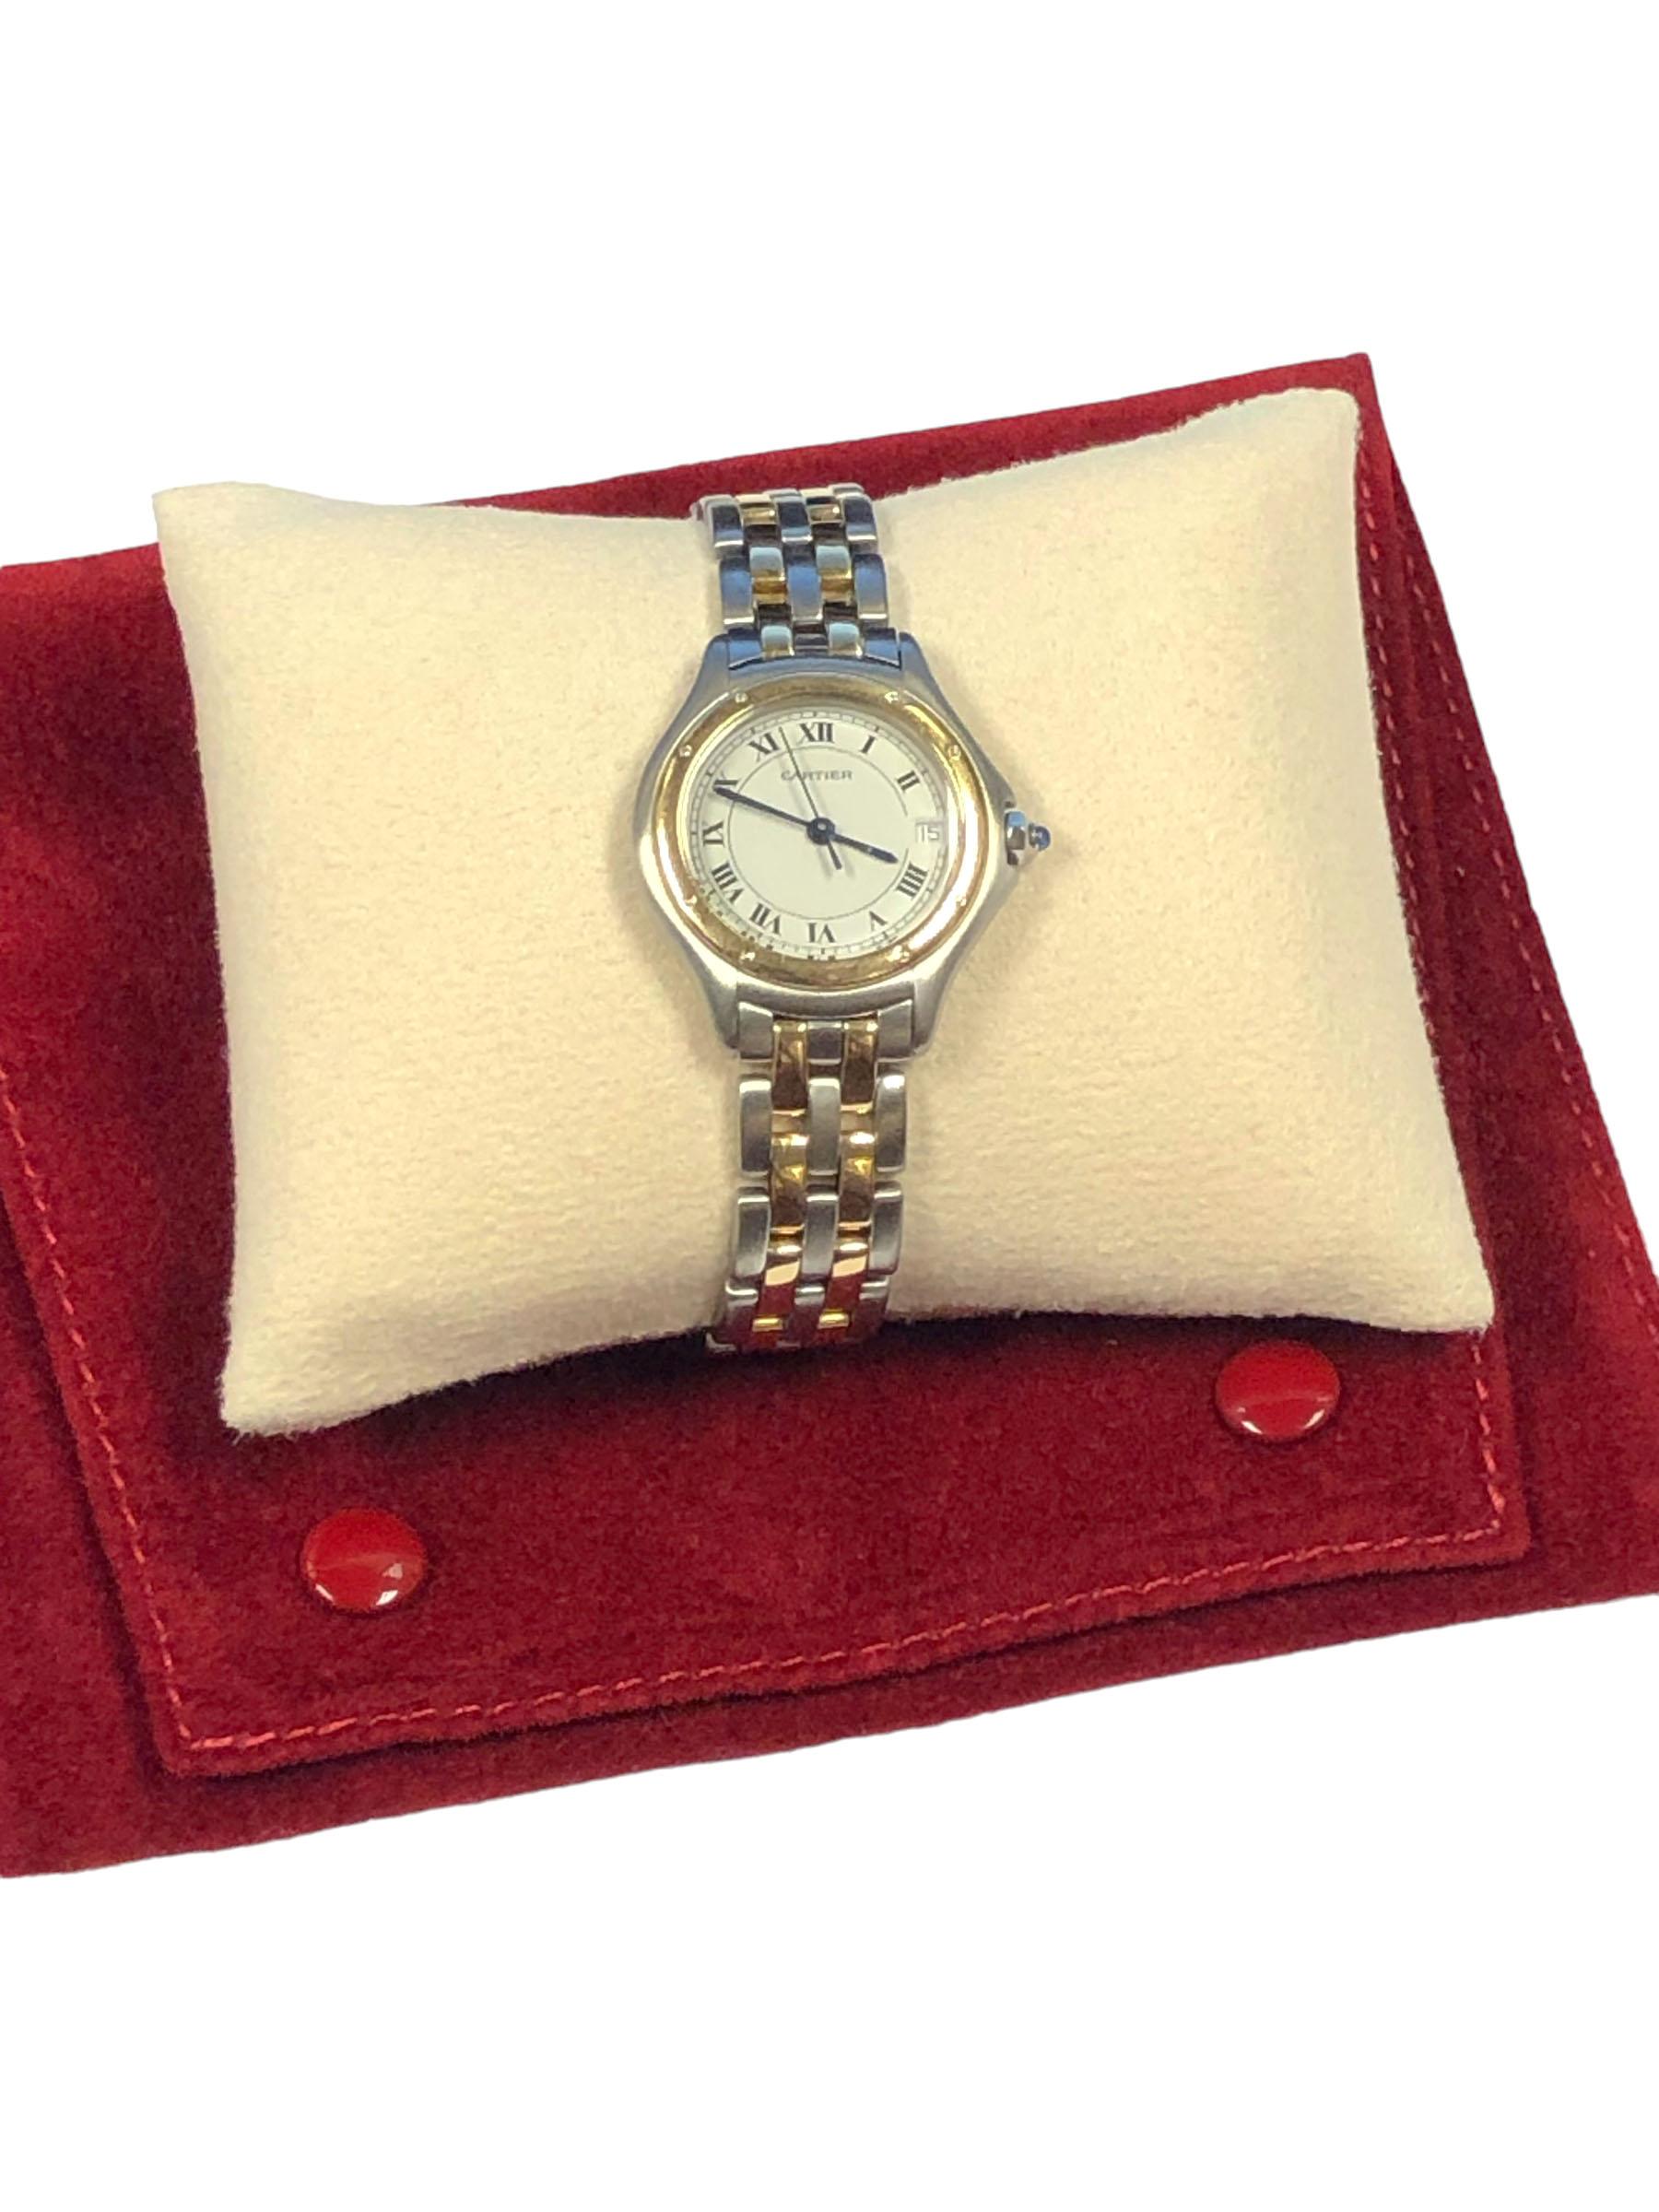 Cartier Cougar 18k and Steel ladies Quartz Wrist Watch In Excellent Condition For Sale In Chicago, IL